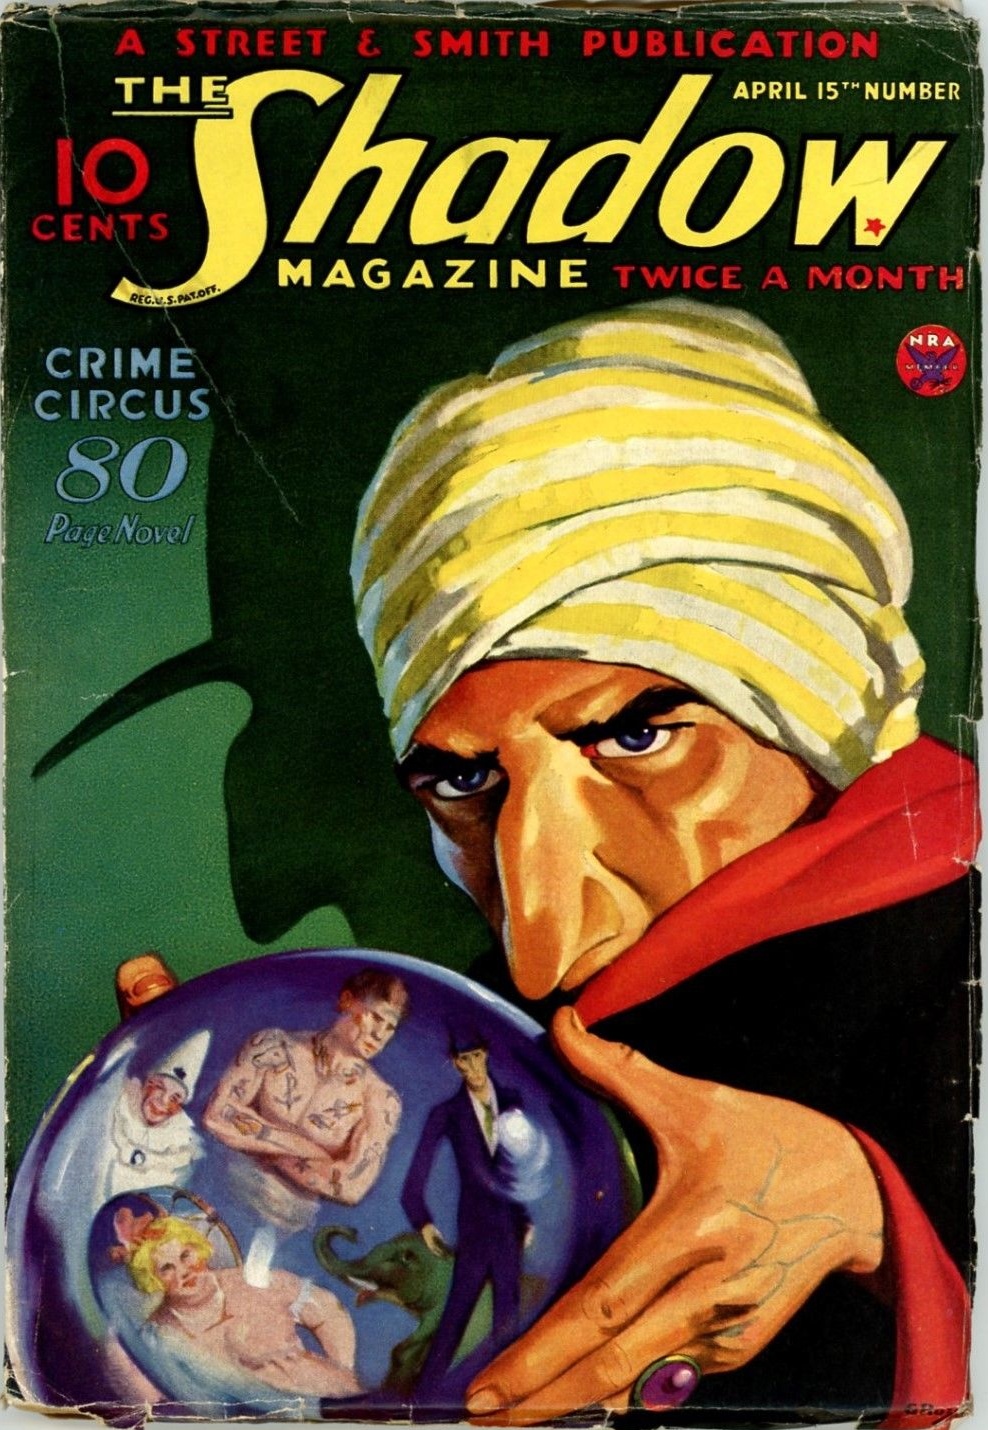 The Shadow, April 15, 1934